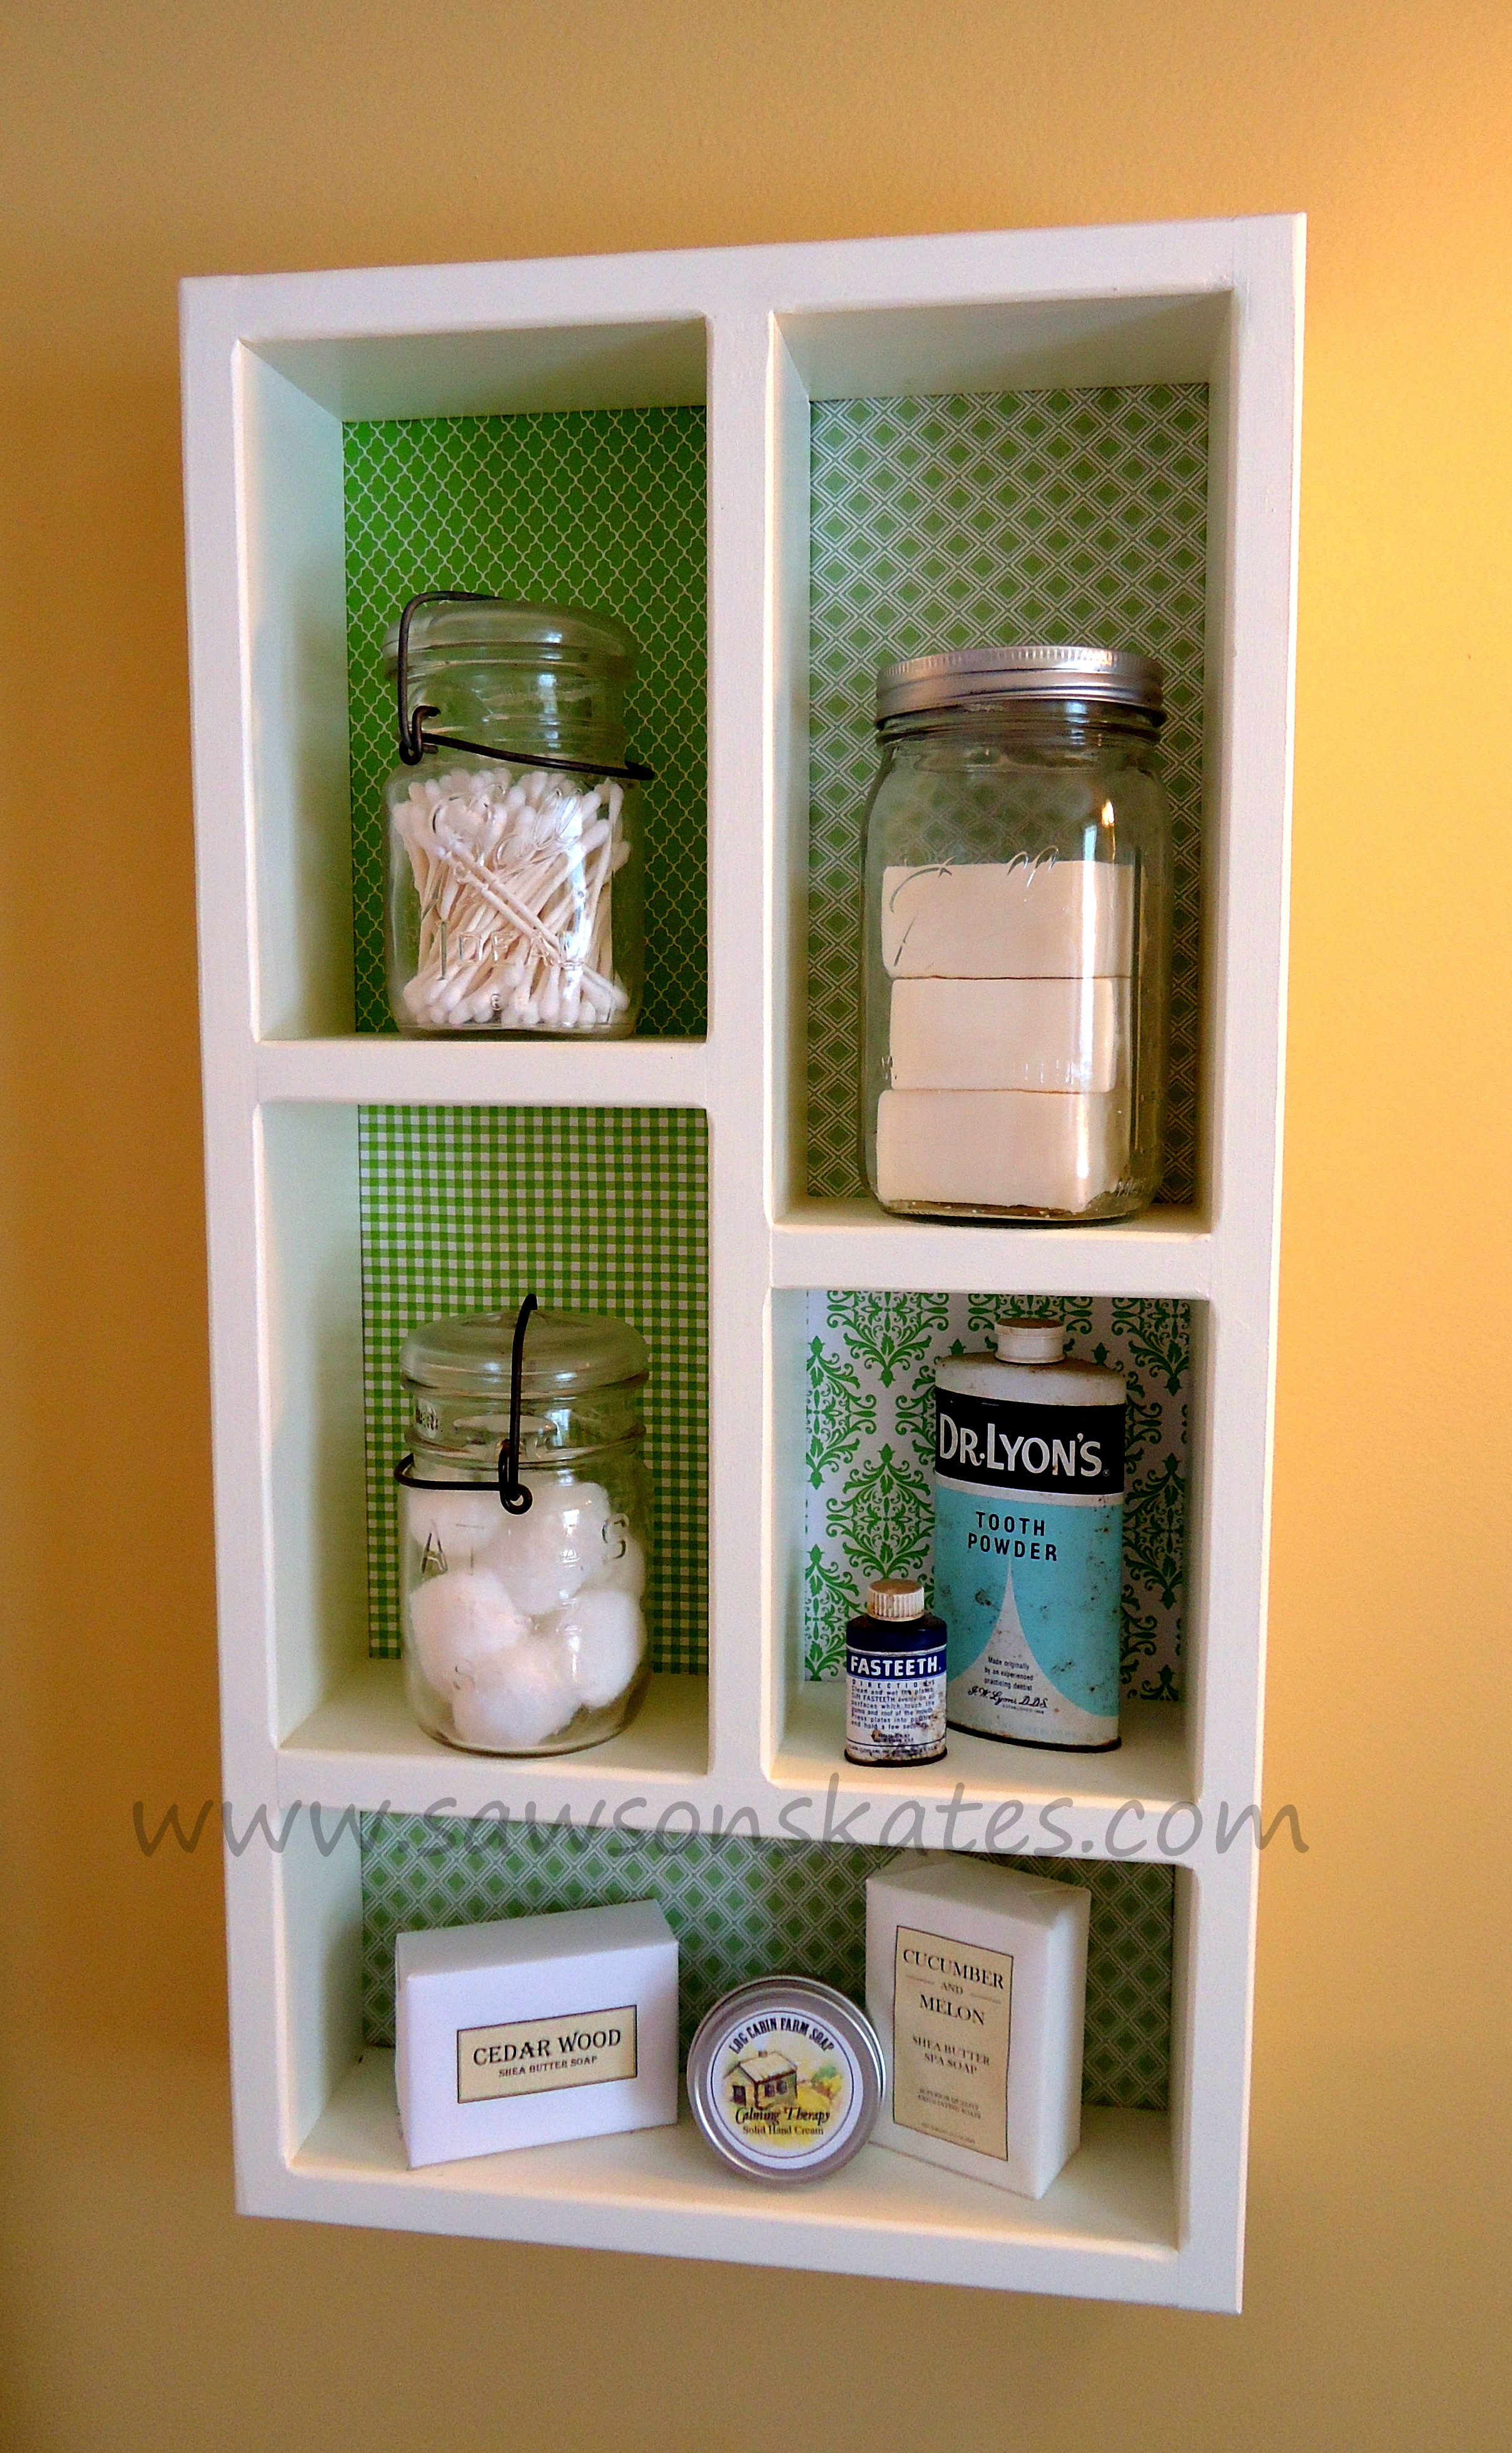 Best ideas about Shadow Box DIY
. Save or Pin DIY Cottage Shadow Box Now.